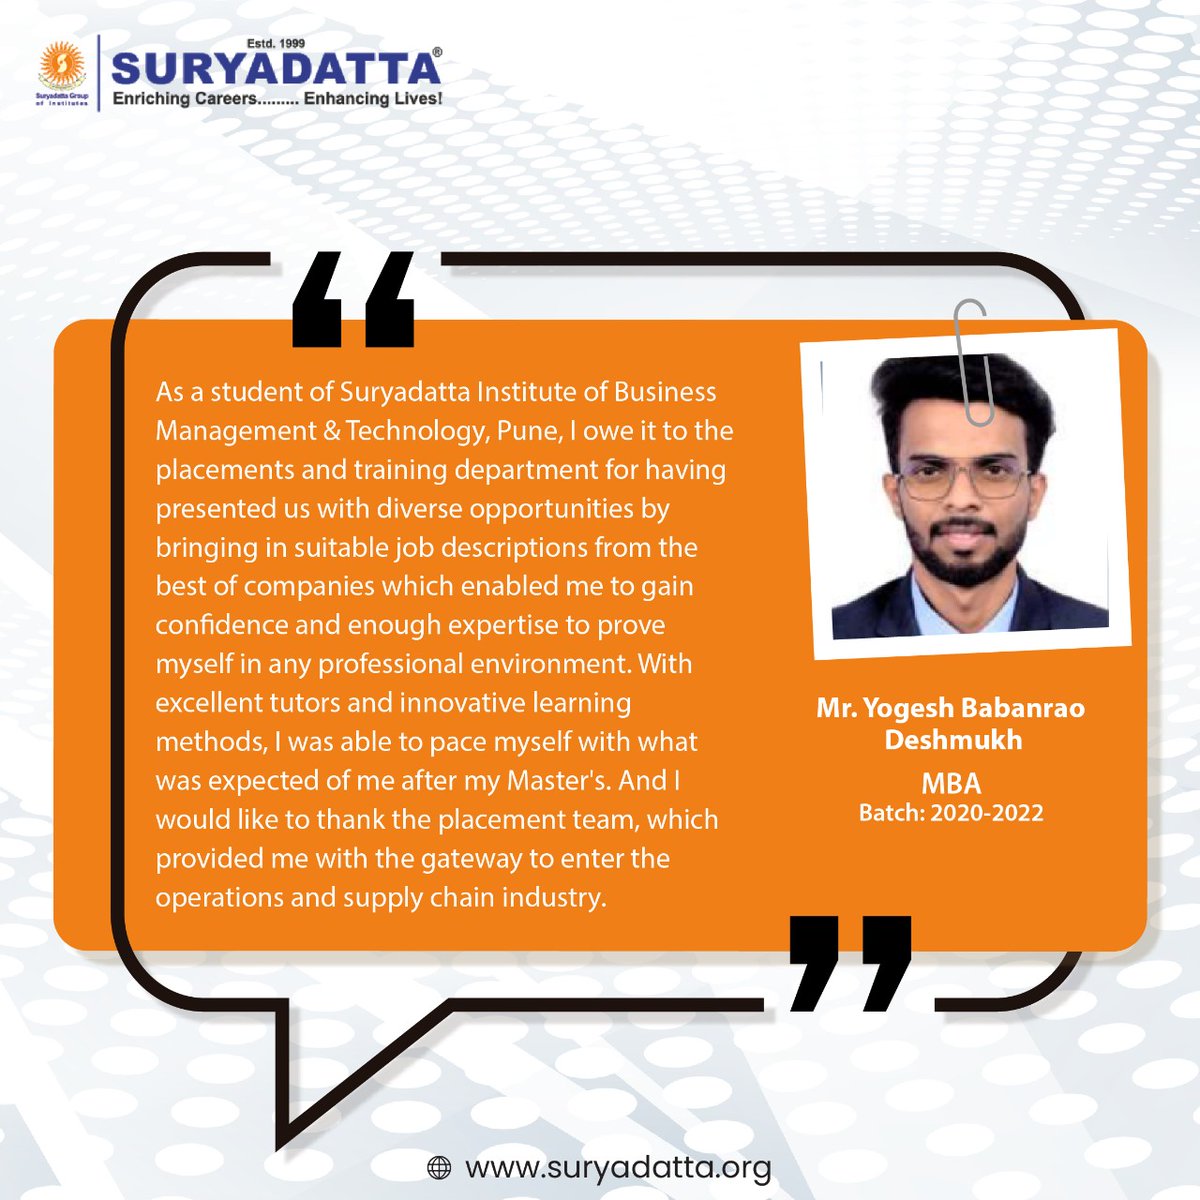 Thank you, Yogesh Babanrao Deshmukh for such a kind review! 

We wish you all the best for a happy future!

#suryadattagroupofinstitute #studentsuccessstory #suryadattapune #MBA #masterofbussinessadministration #mbastudent #businessadministration #studentplacement